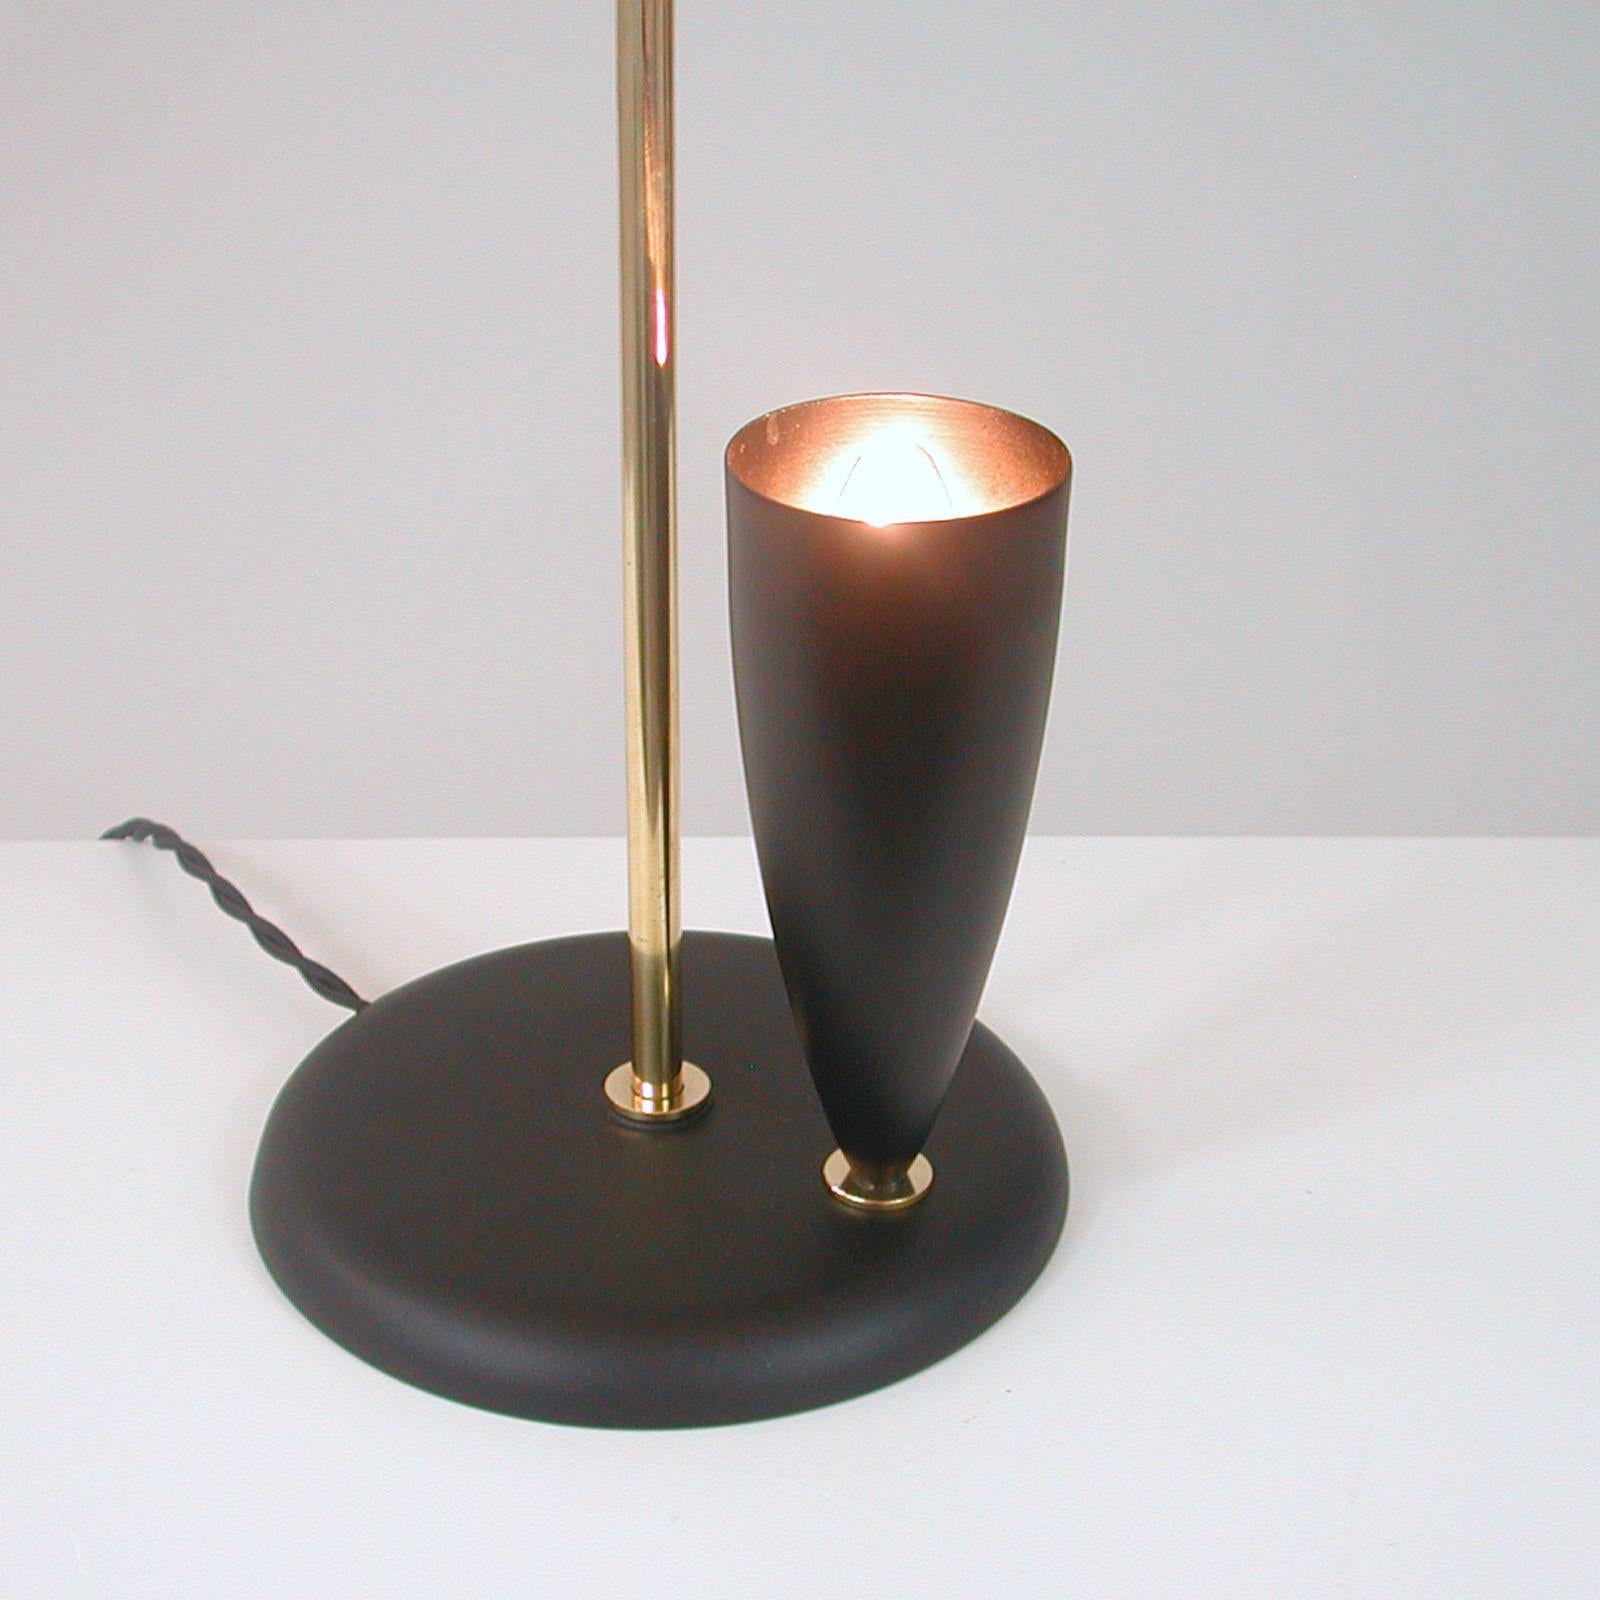 French Midcentury Reflecting Black and Brass Table Lamp, 1950s For Sale 3